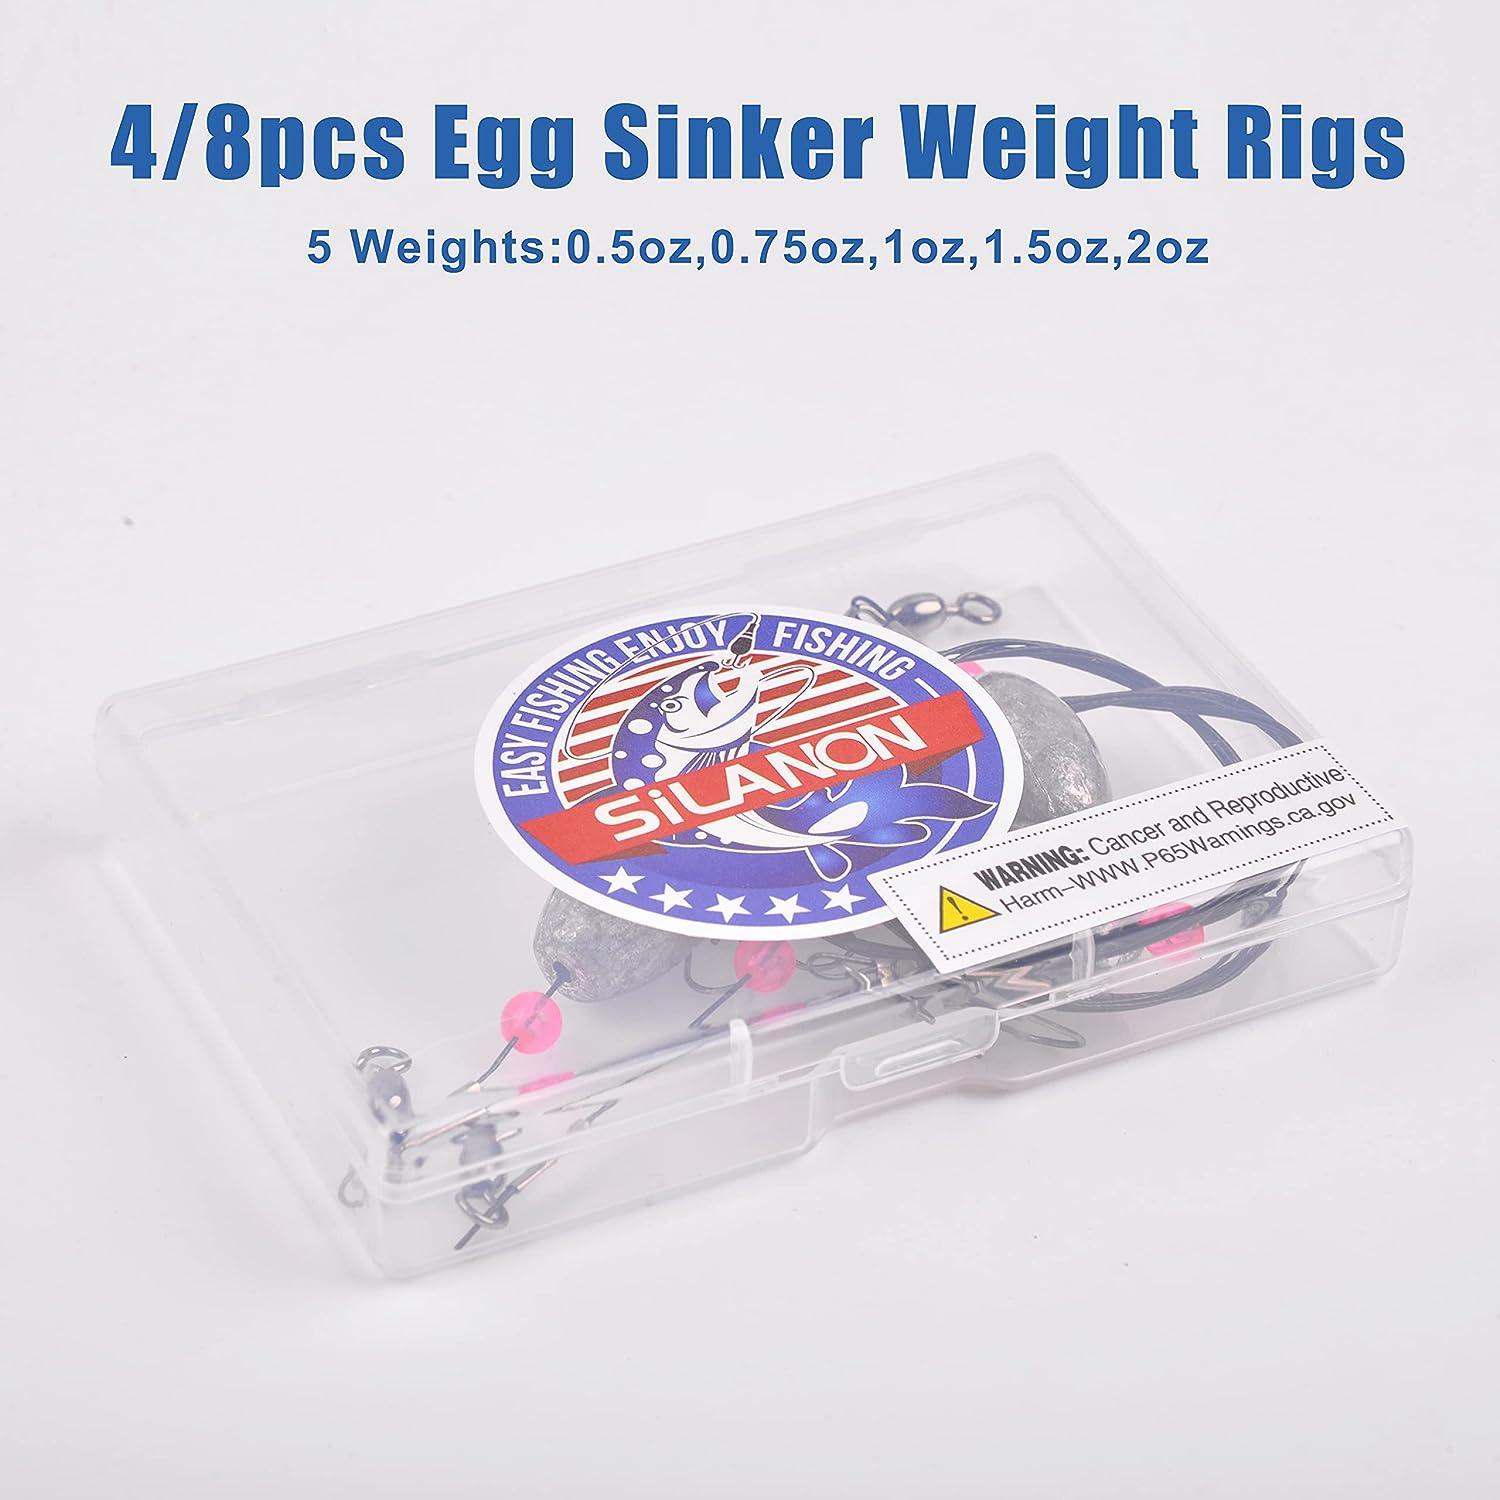 Fishing Egg Sinker Weight Rigs, Stainless Steel Fishing Wire Leaders with  Sinkers Fish Swivels and Snaps